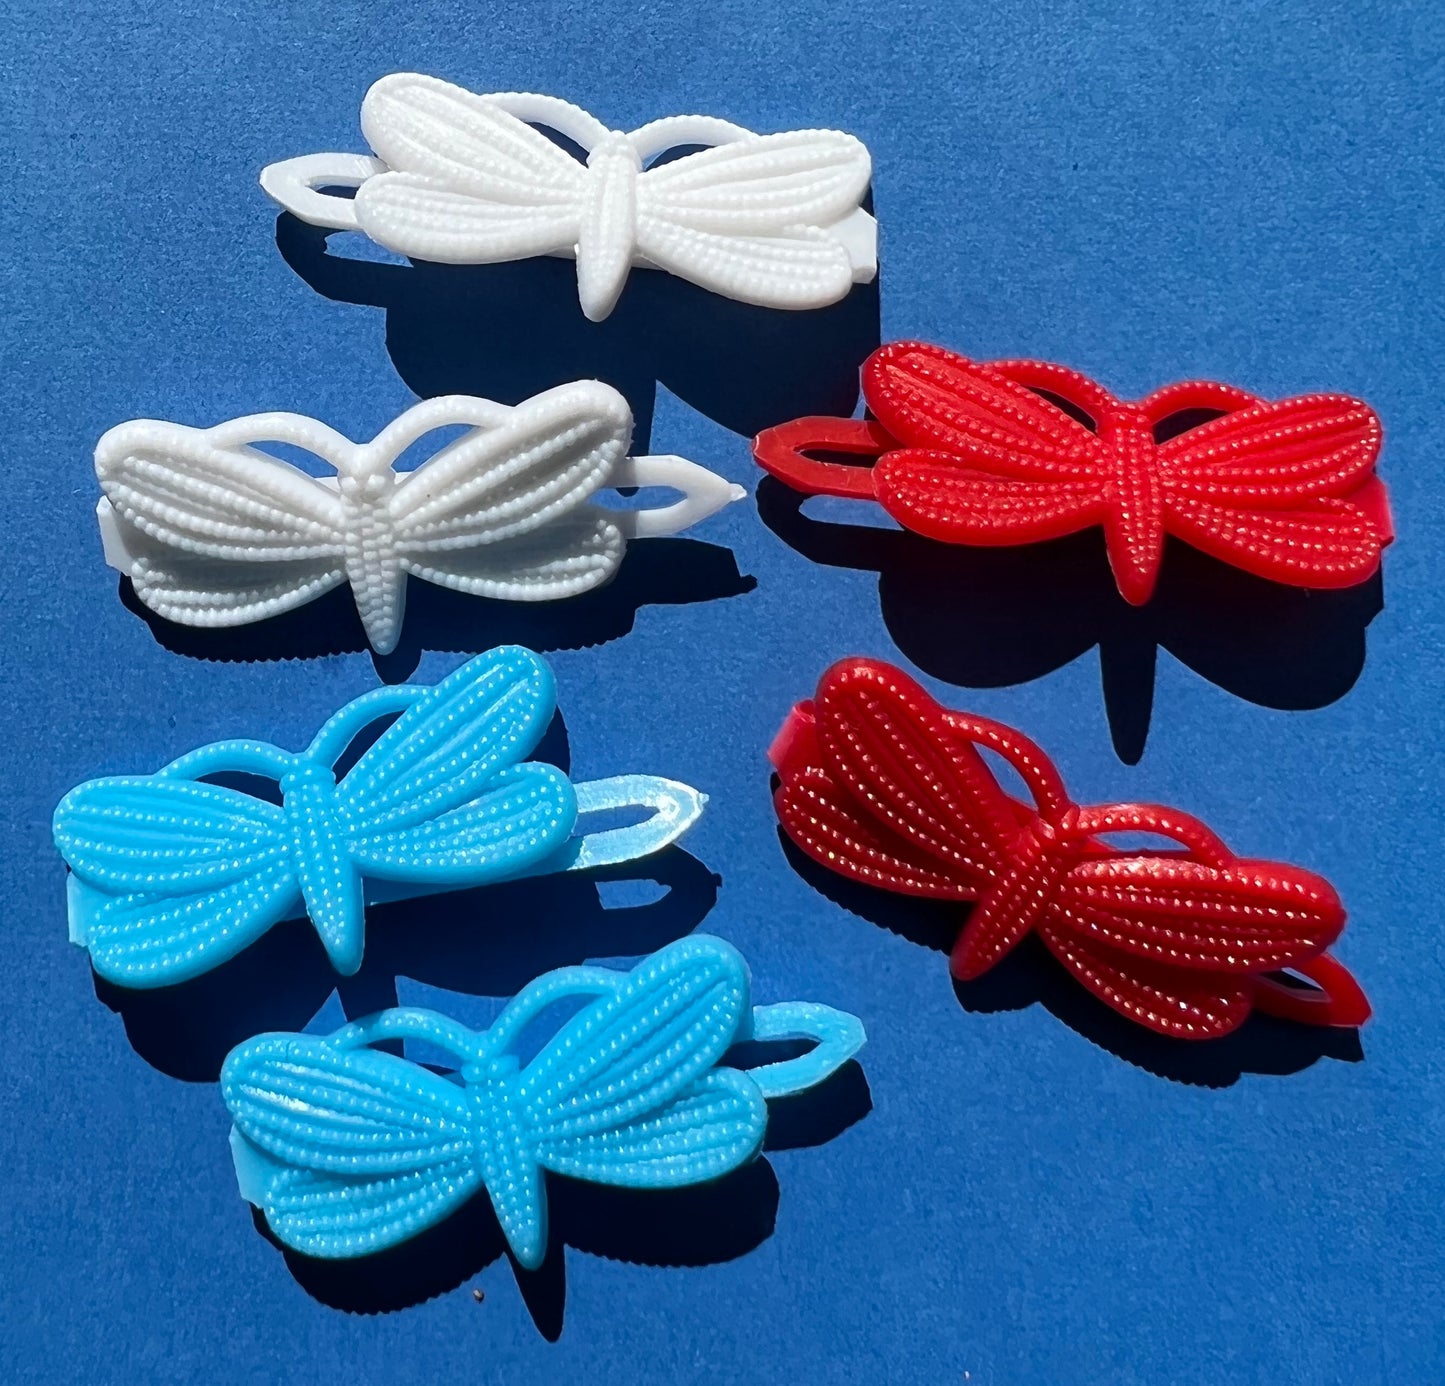 2 Pairs of 1970s Plastic 4cm Hair Grips - Made in Hong kong